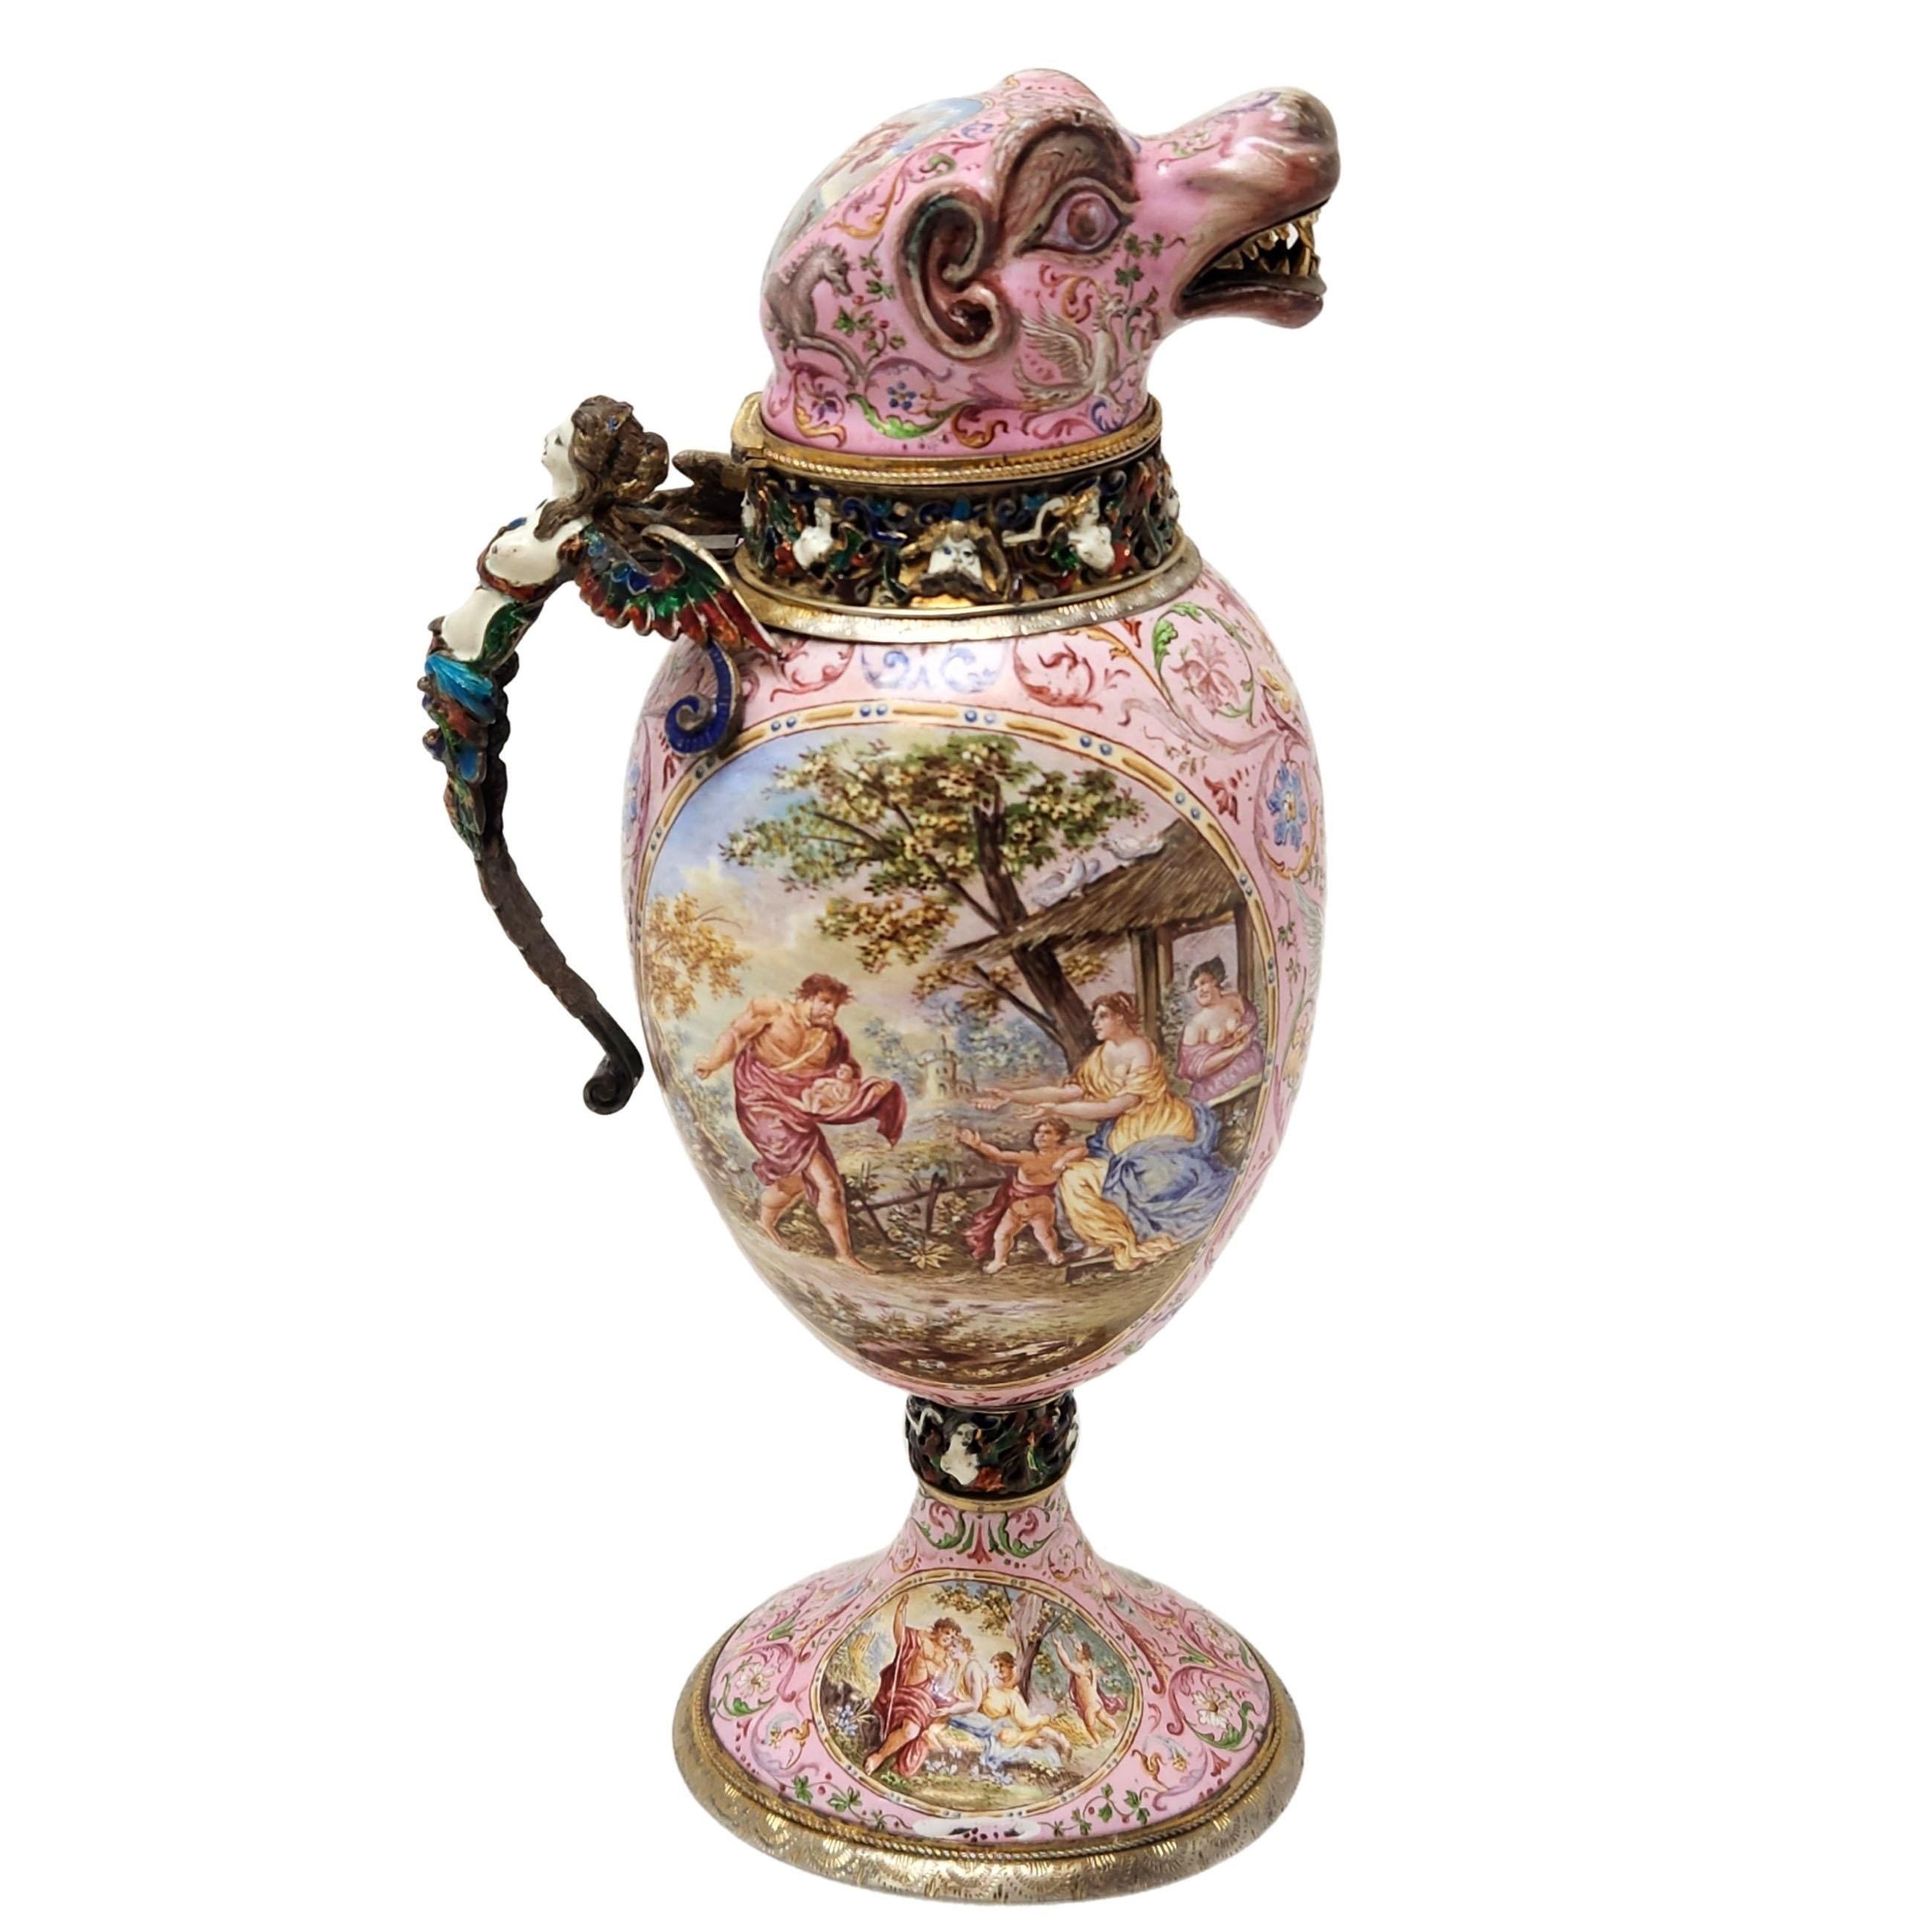 An exceptional Antique 19th Century Viennese Enamel & Silver Jug with exquisitely detailed enamel detailing covering the exterior of the jug. The lid of the jug features a rare bestial head with gilt teeth on a pink enamel background.  The Jug has a